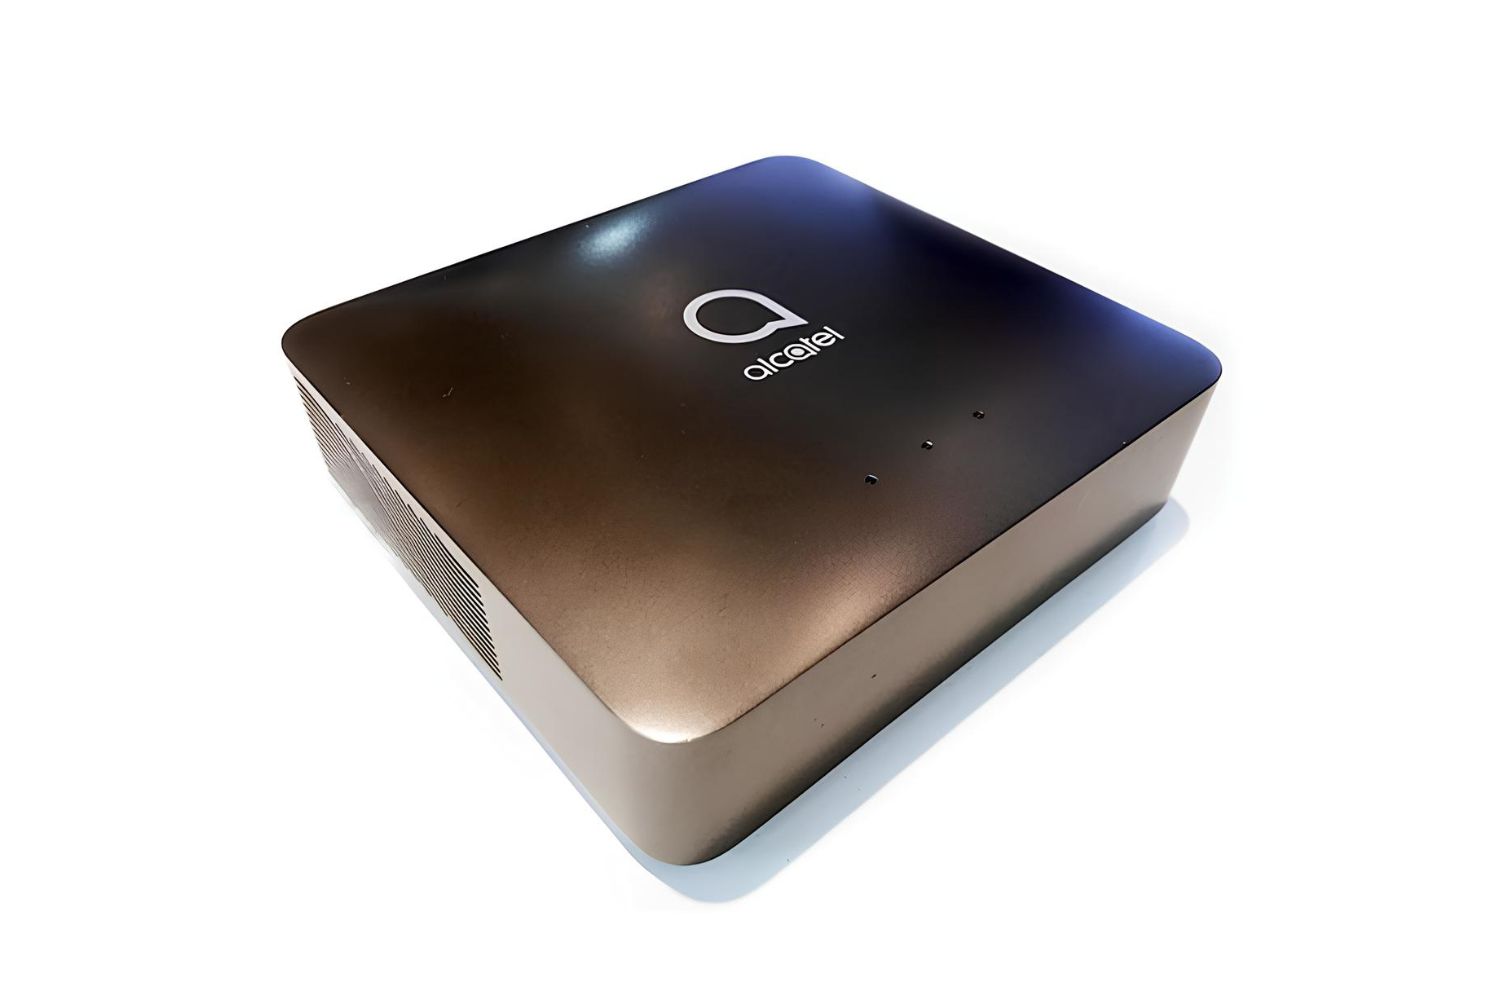 connecting-to-alcatel-hotspot-step-by-step-guide